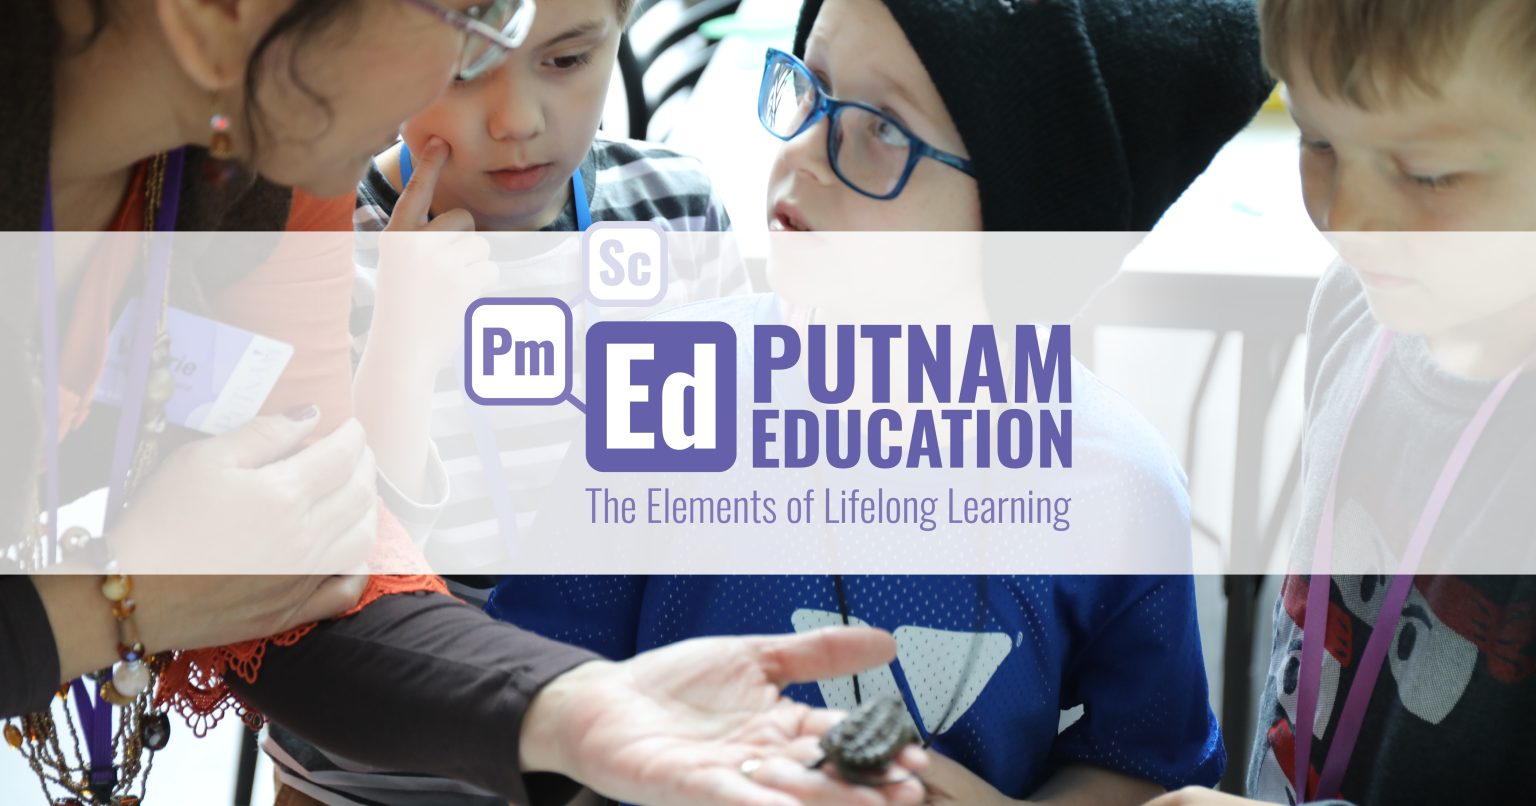 Putnam Education: The Elements of Lifelong Learning, featuring a Putnam Educator showing a group of children a small turtle in her hand.